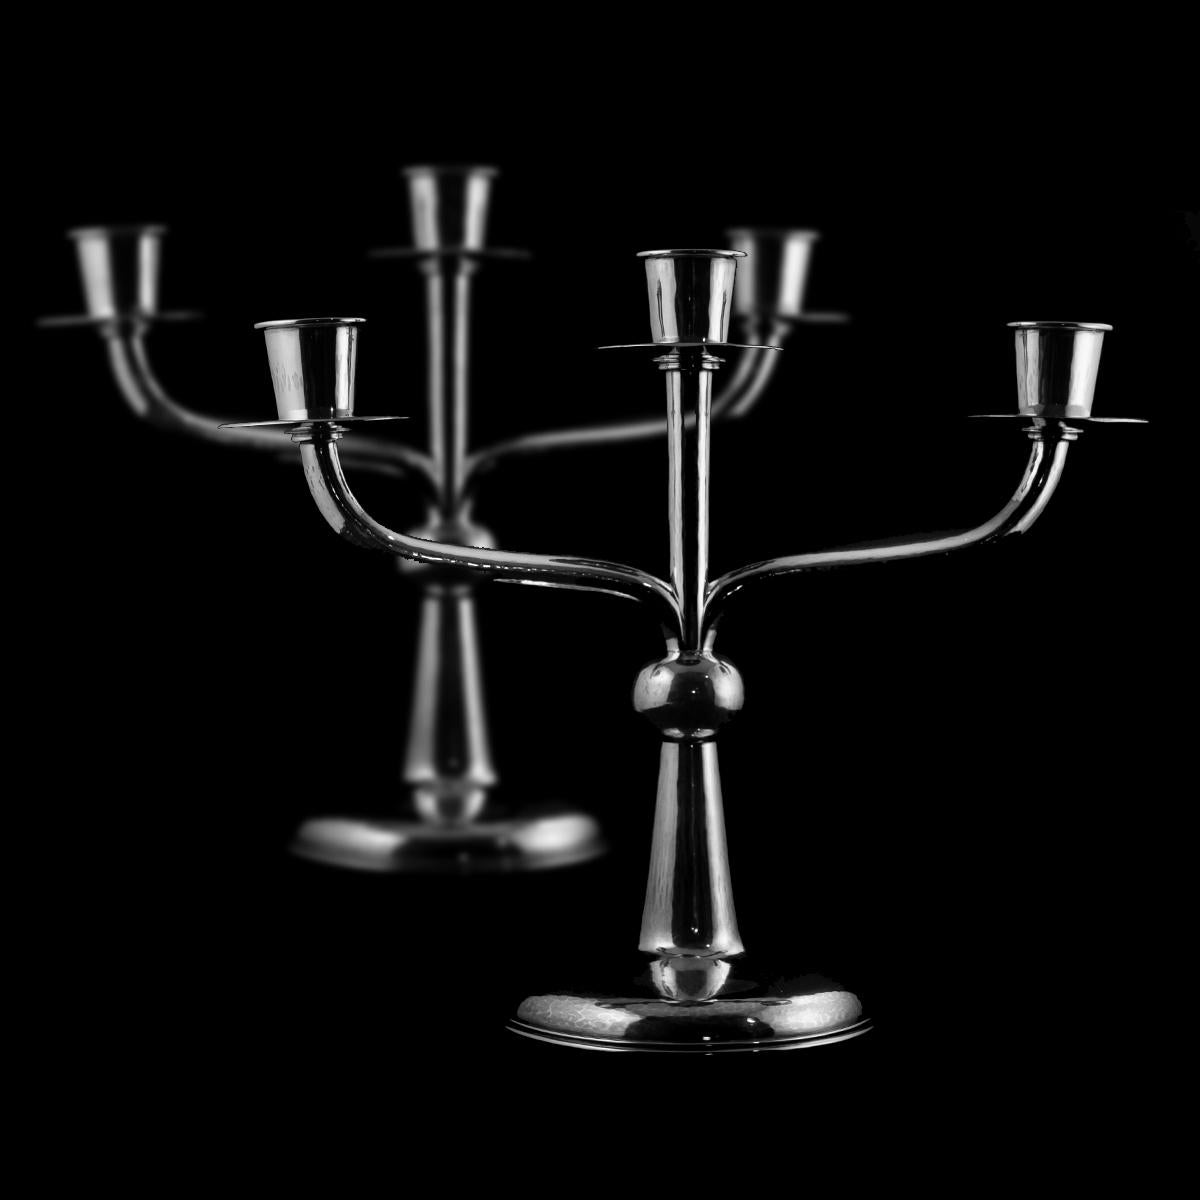 Important pair of 3-flame candlesticks in 925 silver from the 1930s  - Germany - resting on circular bases.
Since ancient times, silver has fascinated mankind for its characteristics of luster, ductility and preciousness.
The birth of the